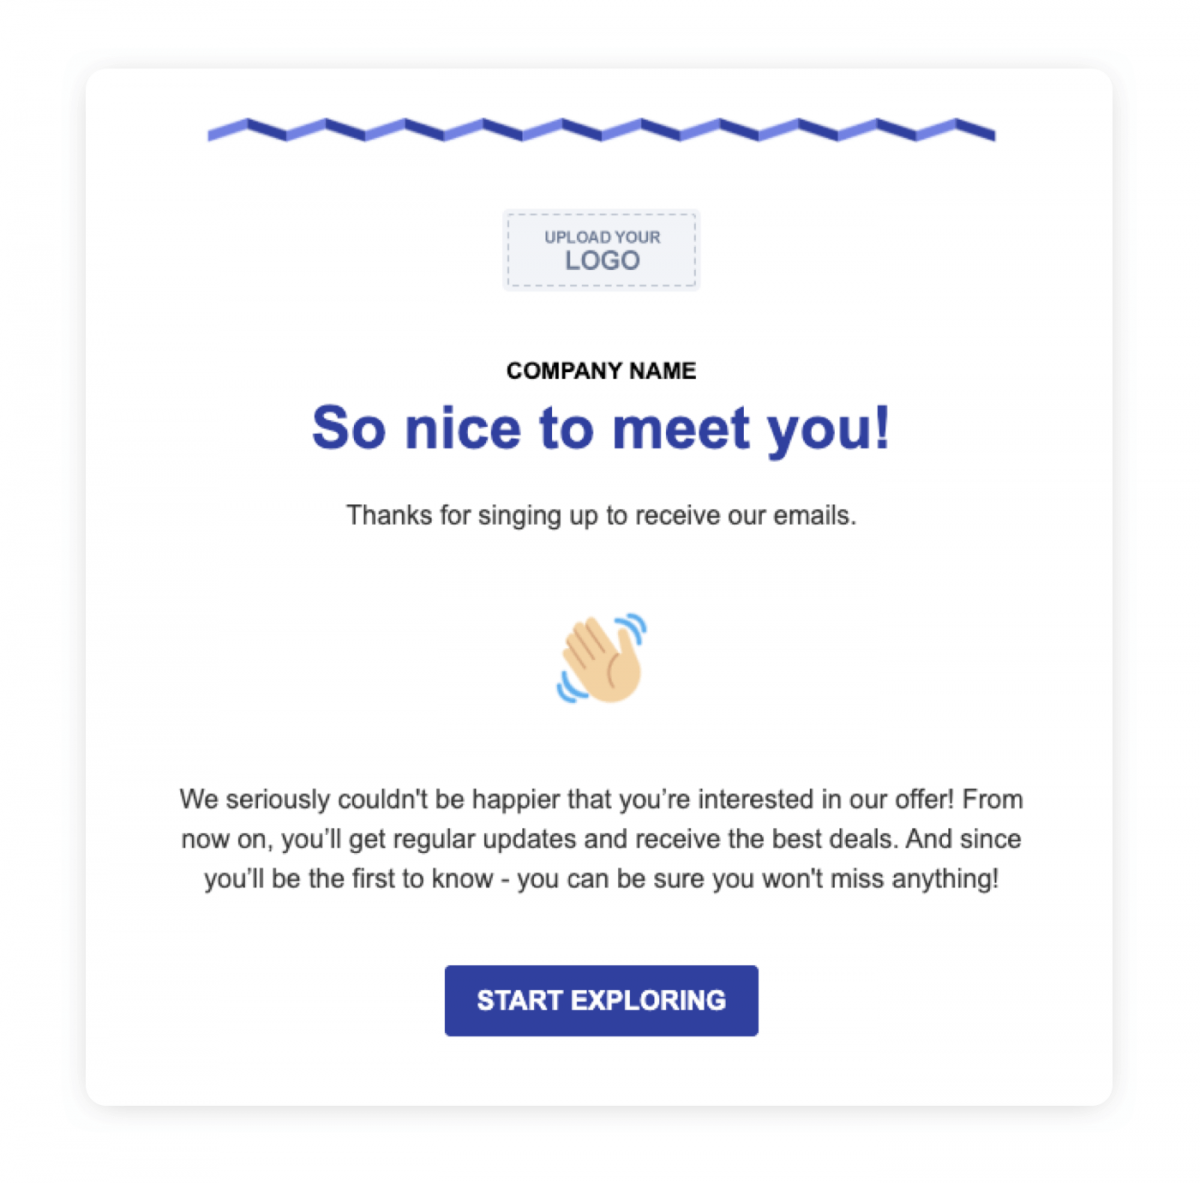 An automated welcome email example for customer onboarding